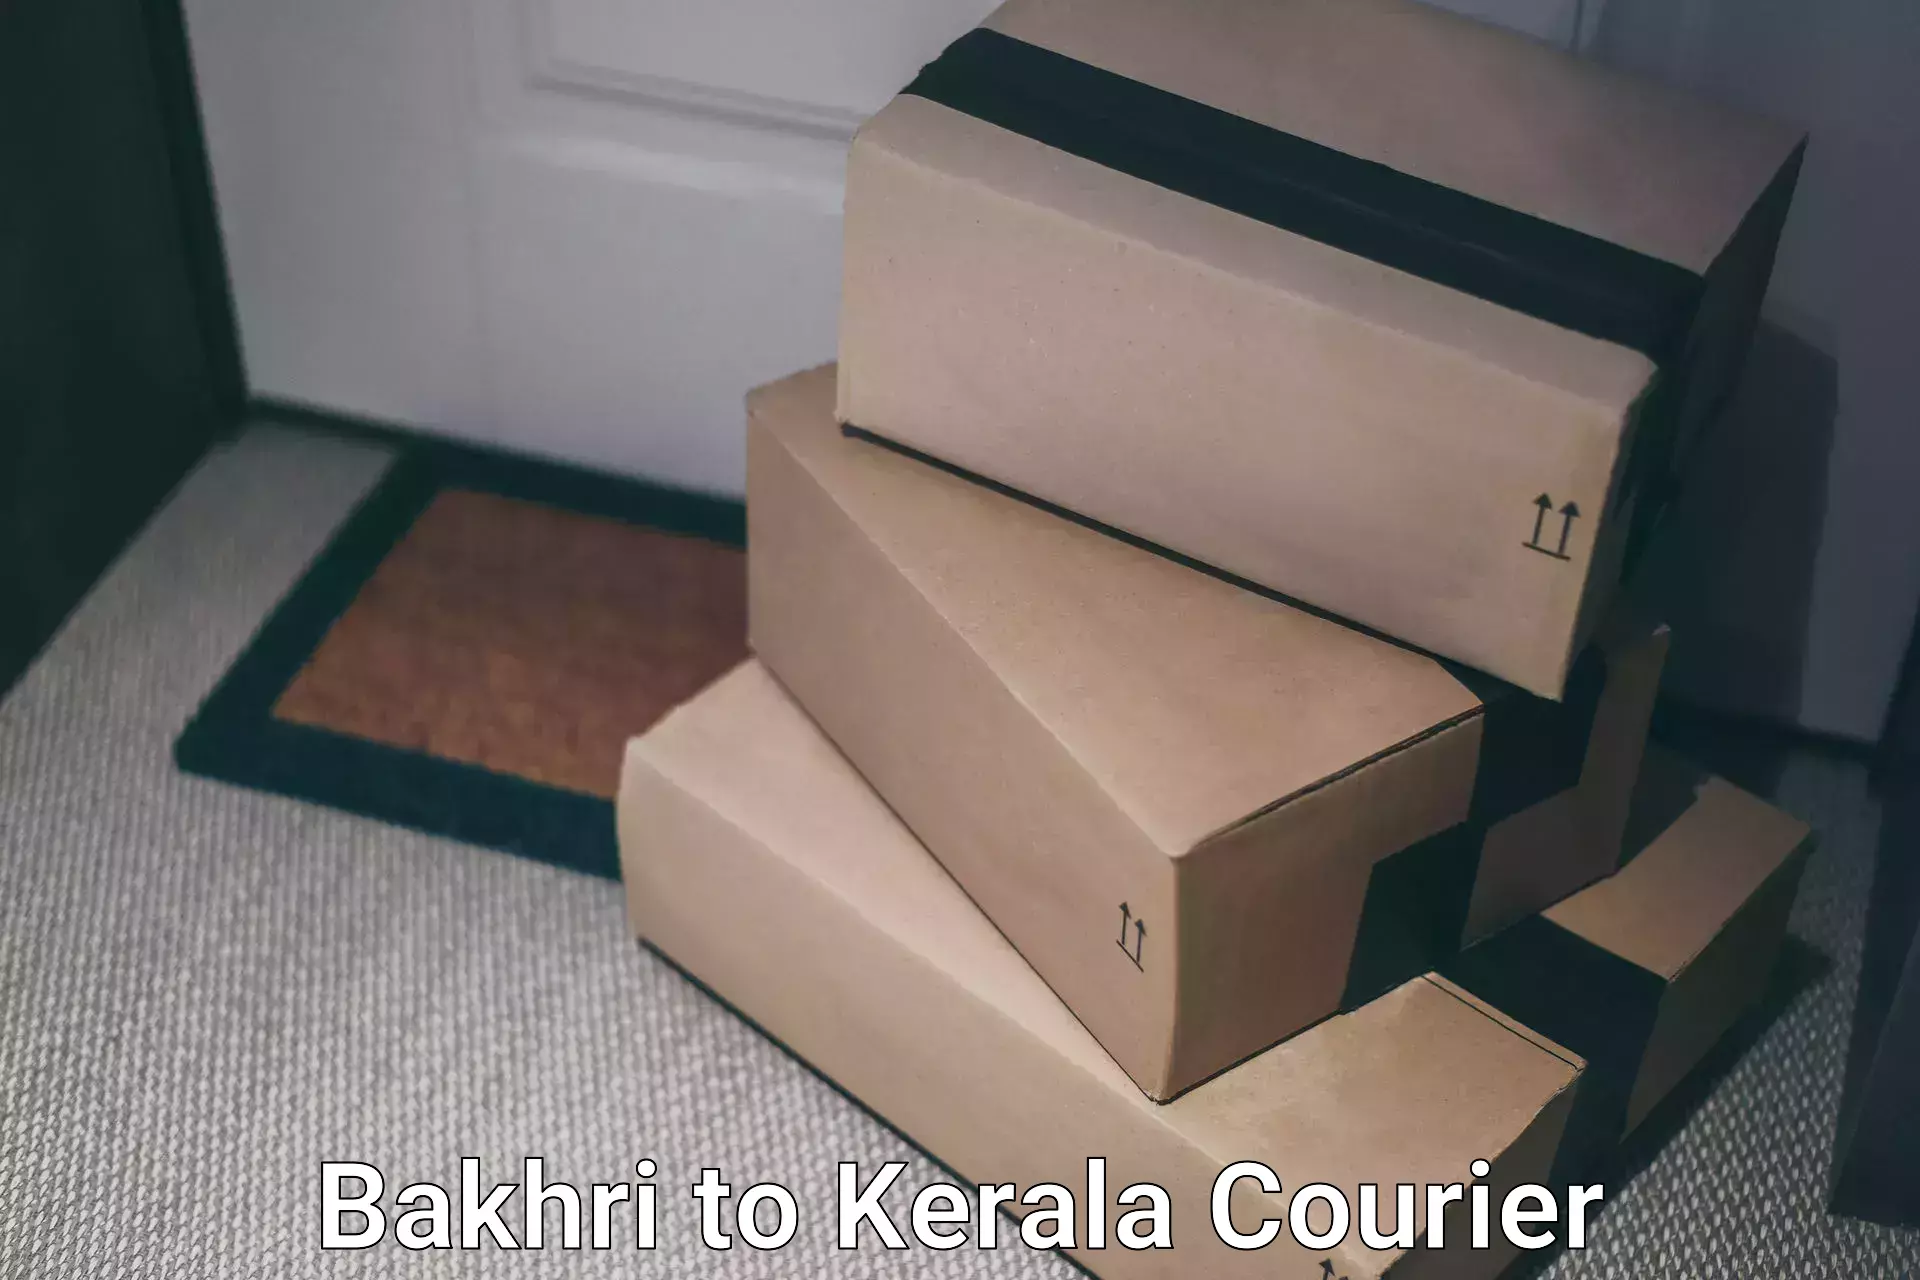 Round-the-clock parcel delivery Bakhri to Kerala